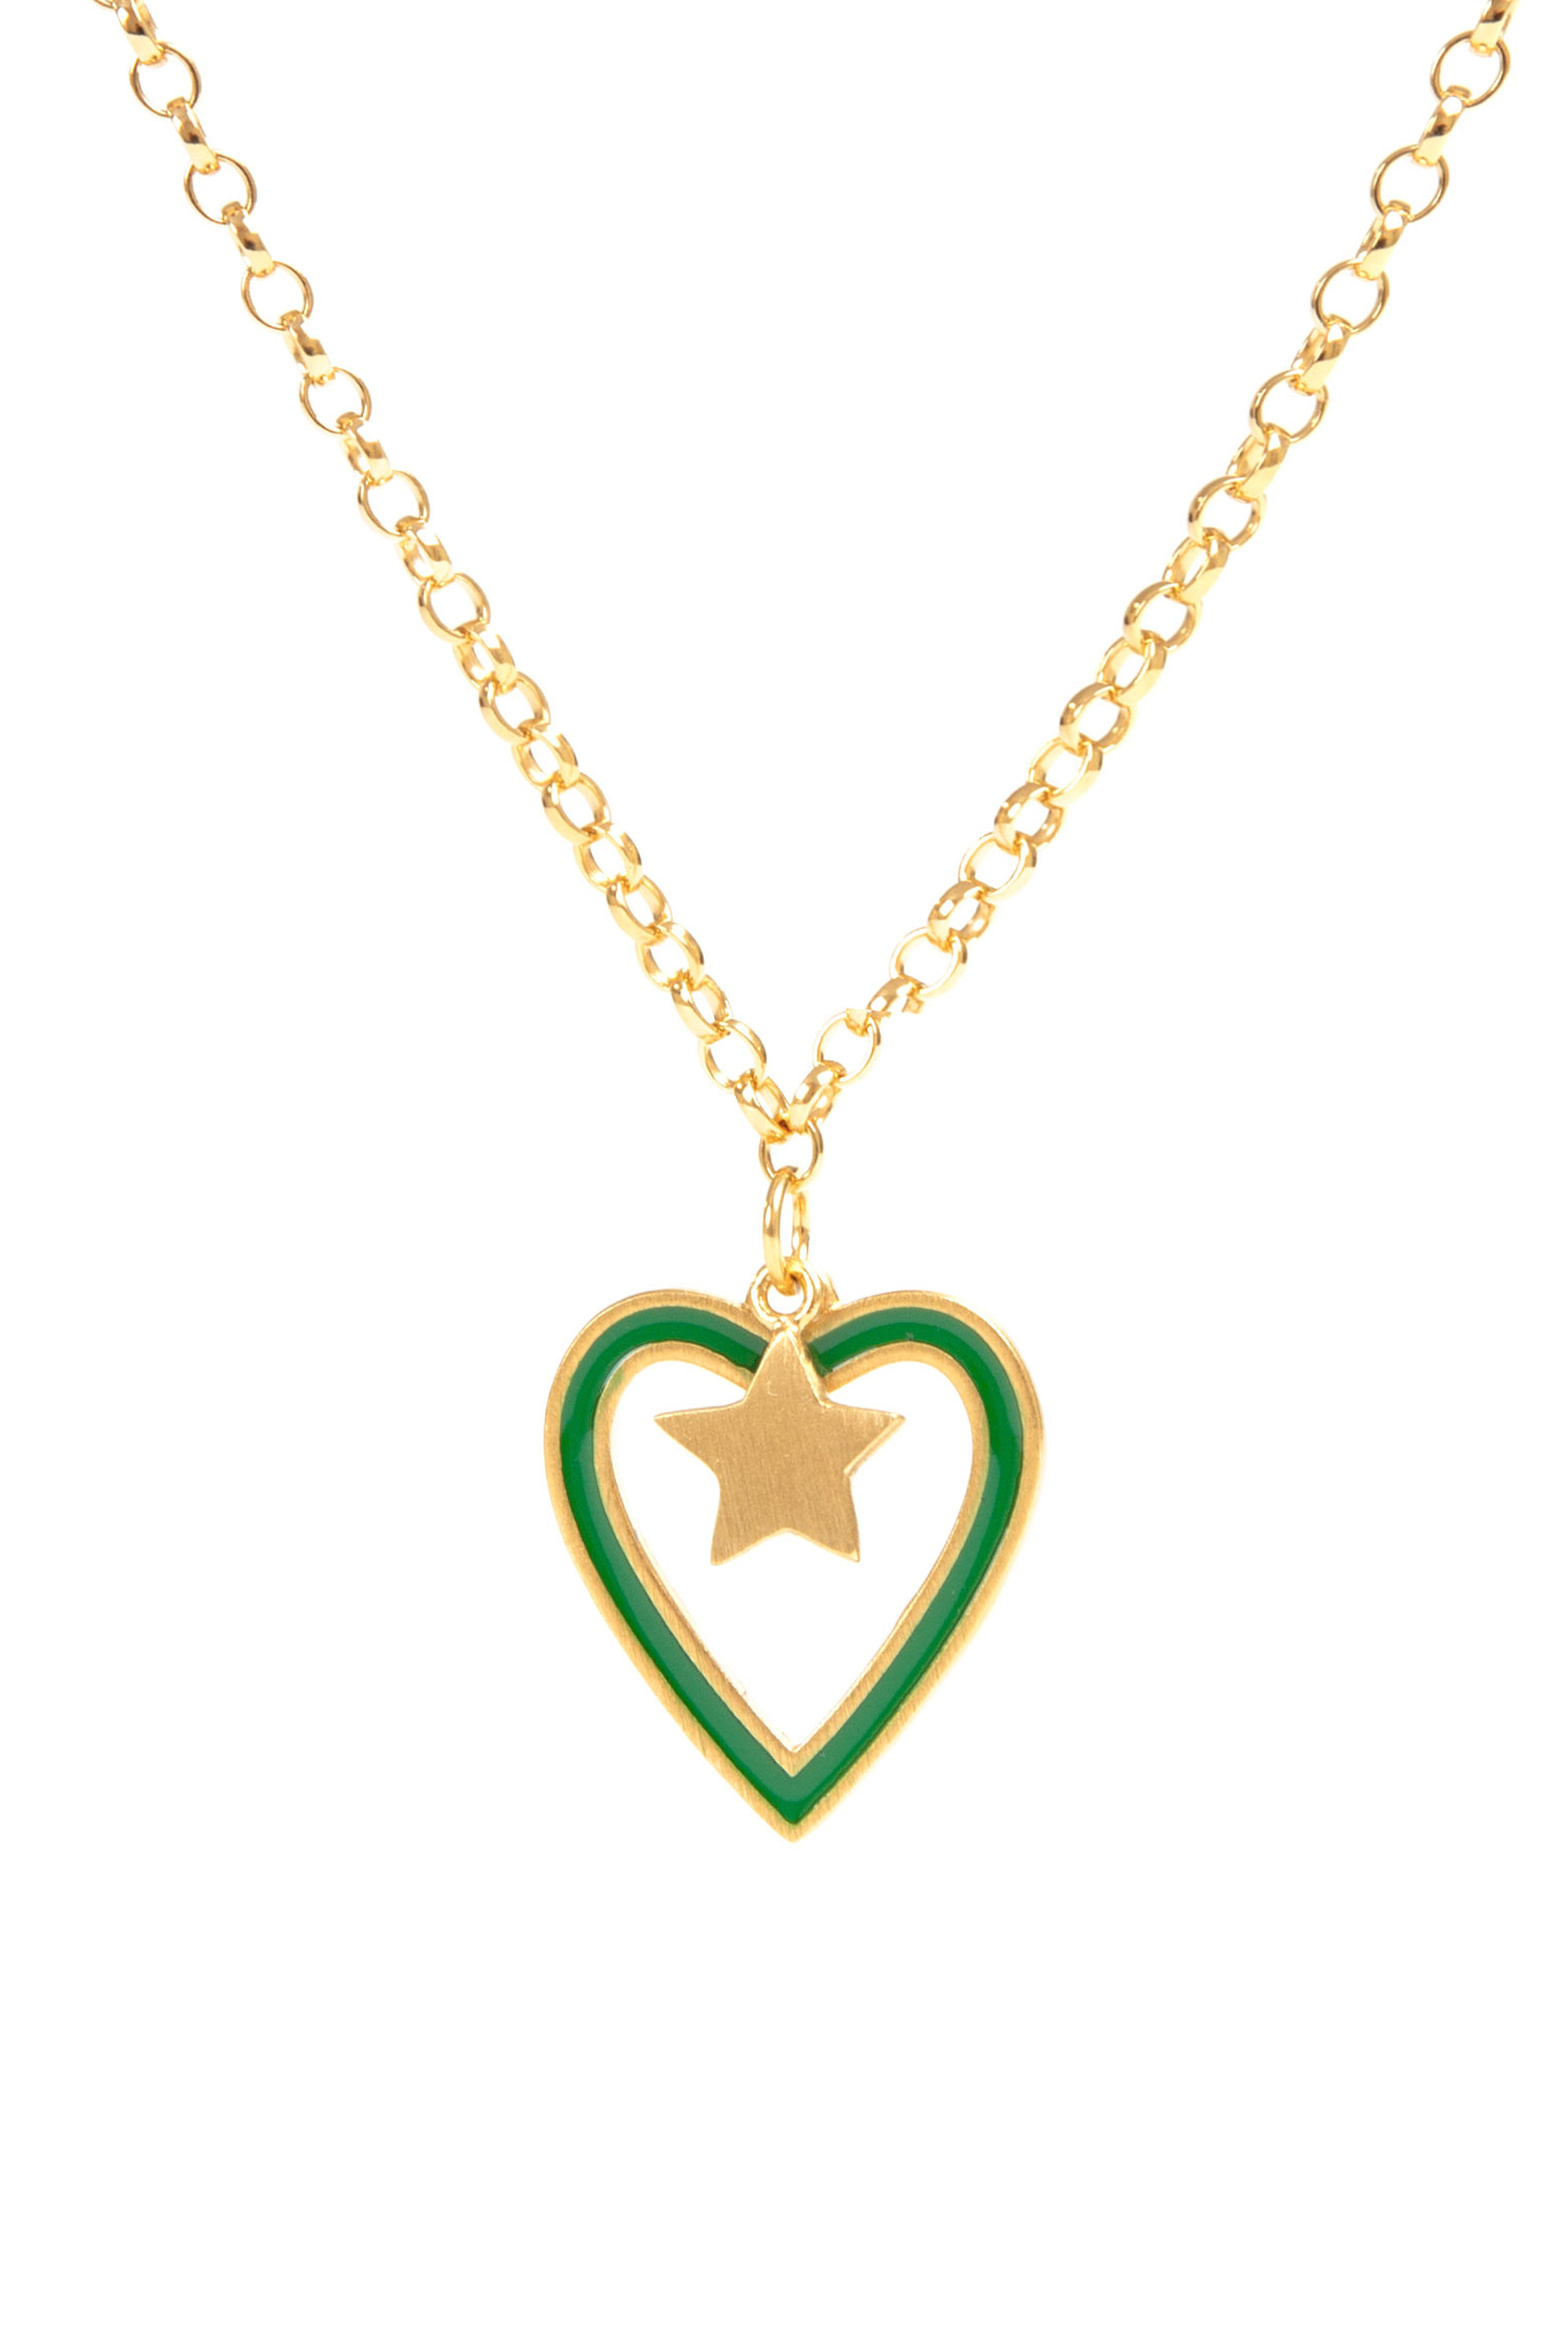 cb163_heart_necklace_leaf_heart_gold_chain_resized.jpg